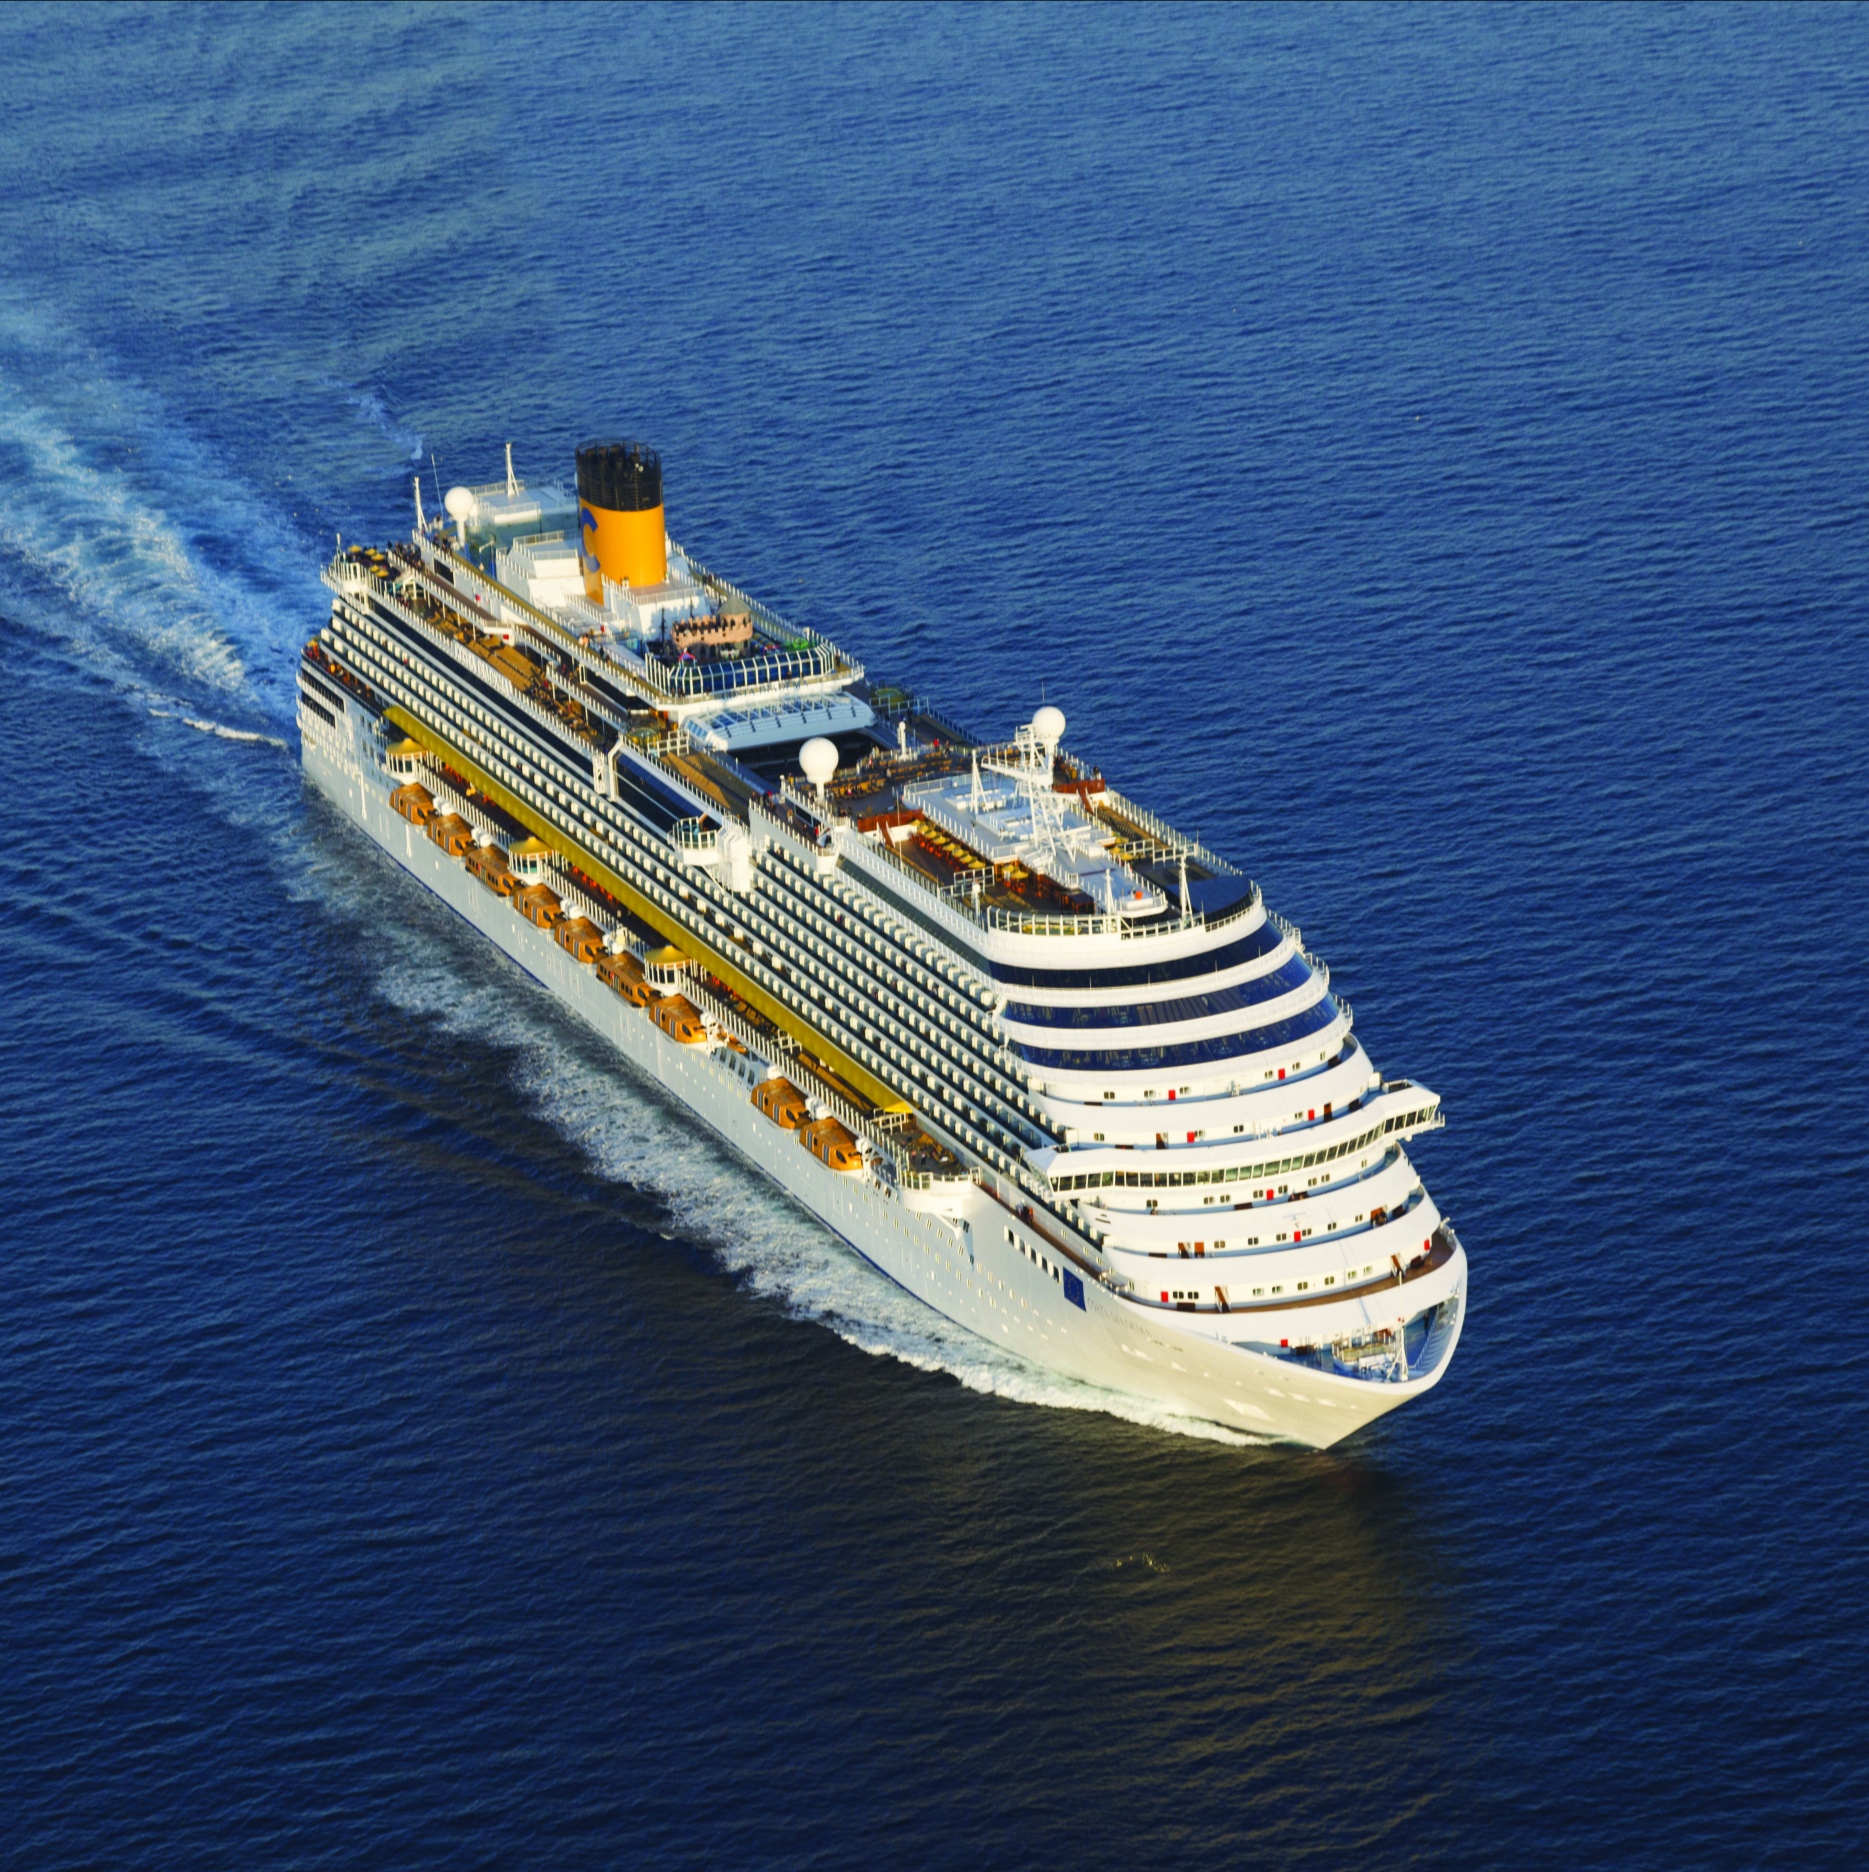 Costa Cruises further strengthens precautions on board its ships